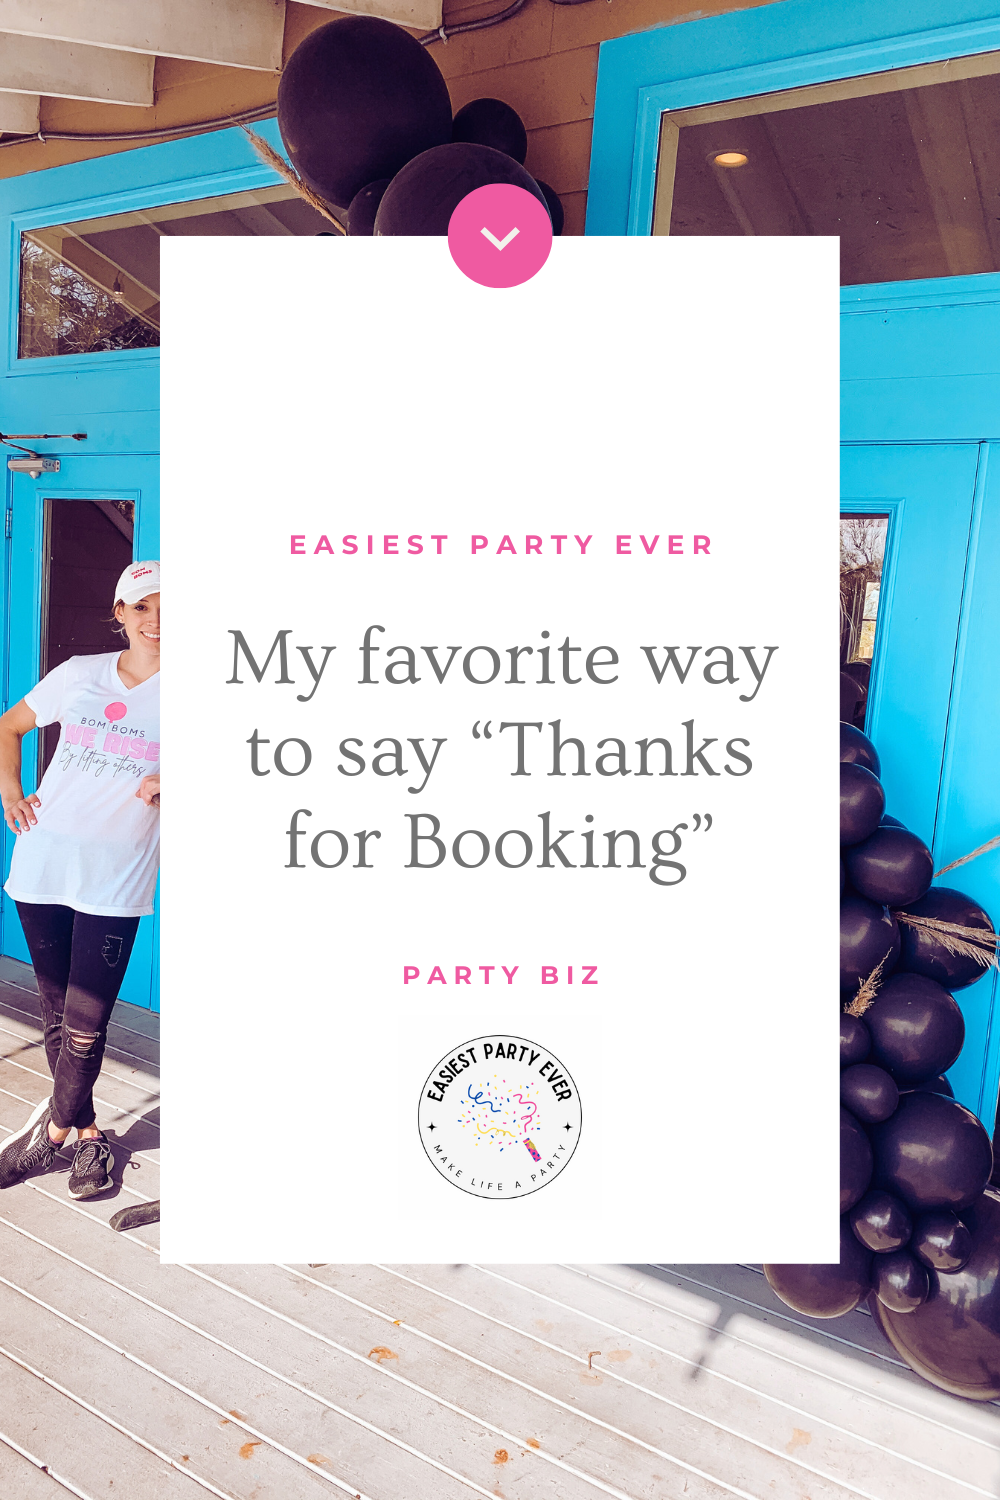 My favorite way to say “Thanks for Booking”